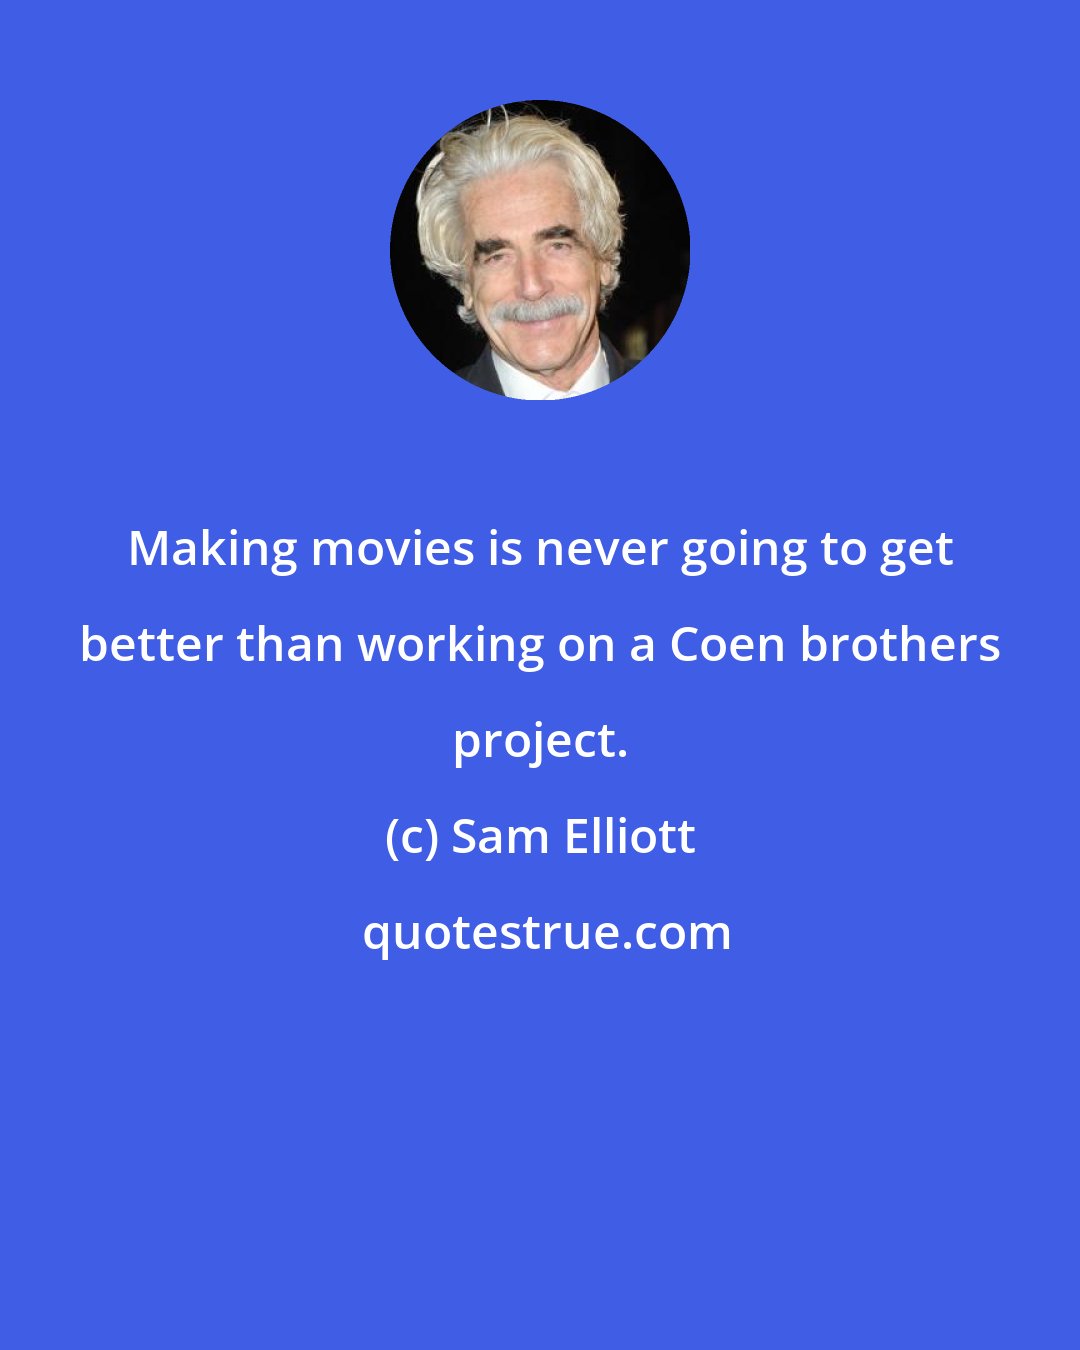 Sam Elliott: Making movies is never going to get better than working on a Coen brothers project.